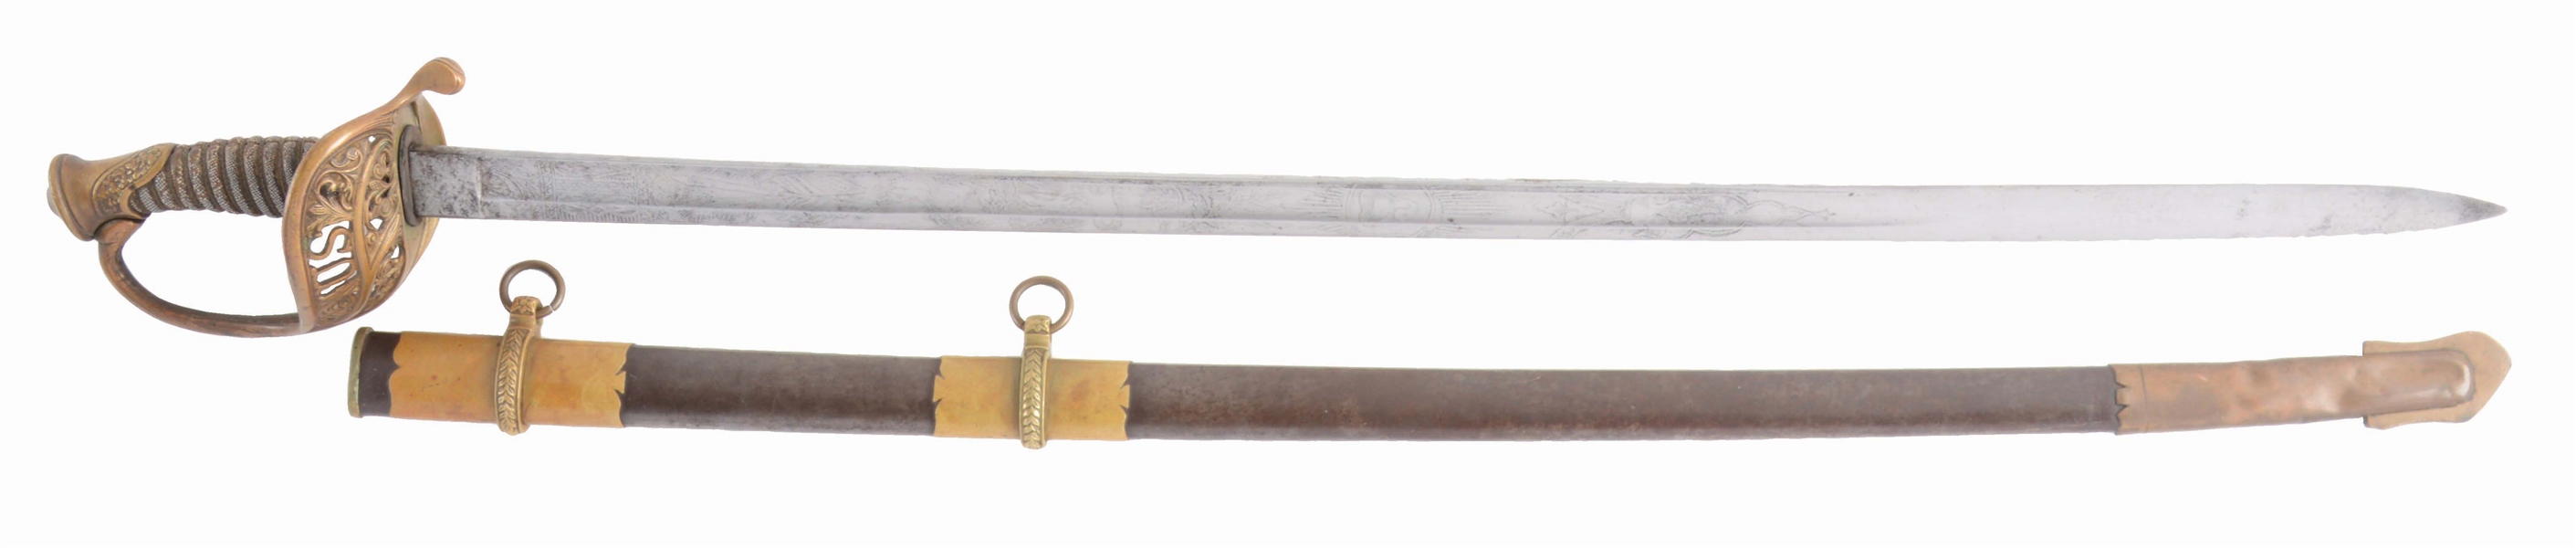 MODEL 1850 STAFF & FIELD OFFICERS SABER RETAILED BY SCHUYLER, HARTLEY, AND GRAHAM WITH KLAUBERG BLADE.